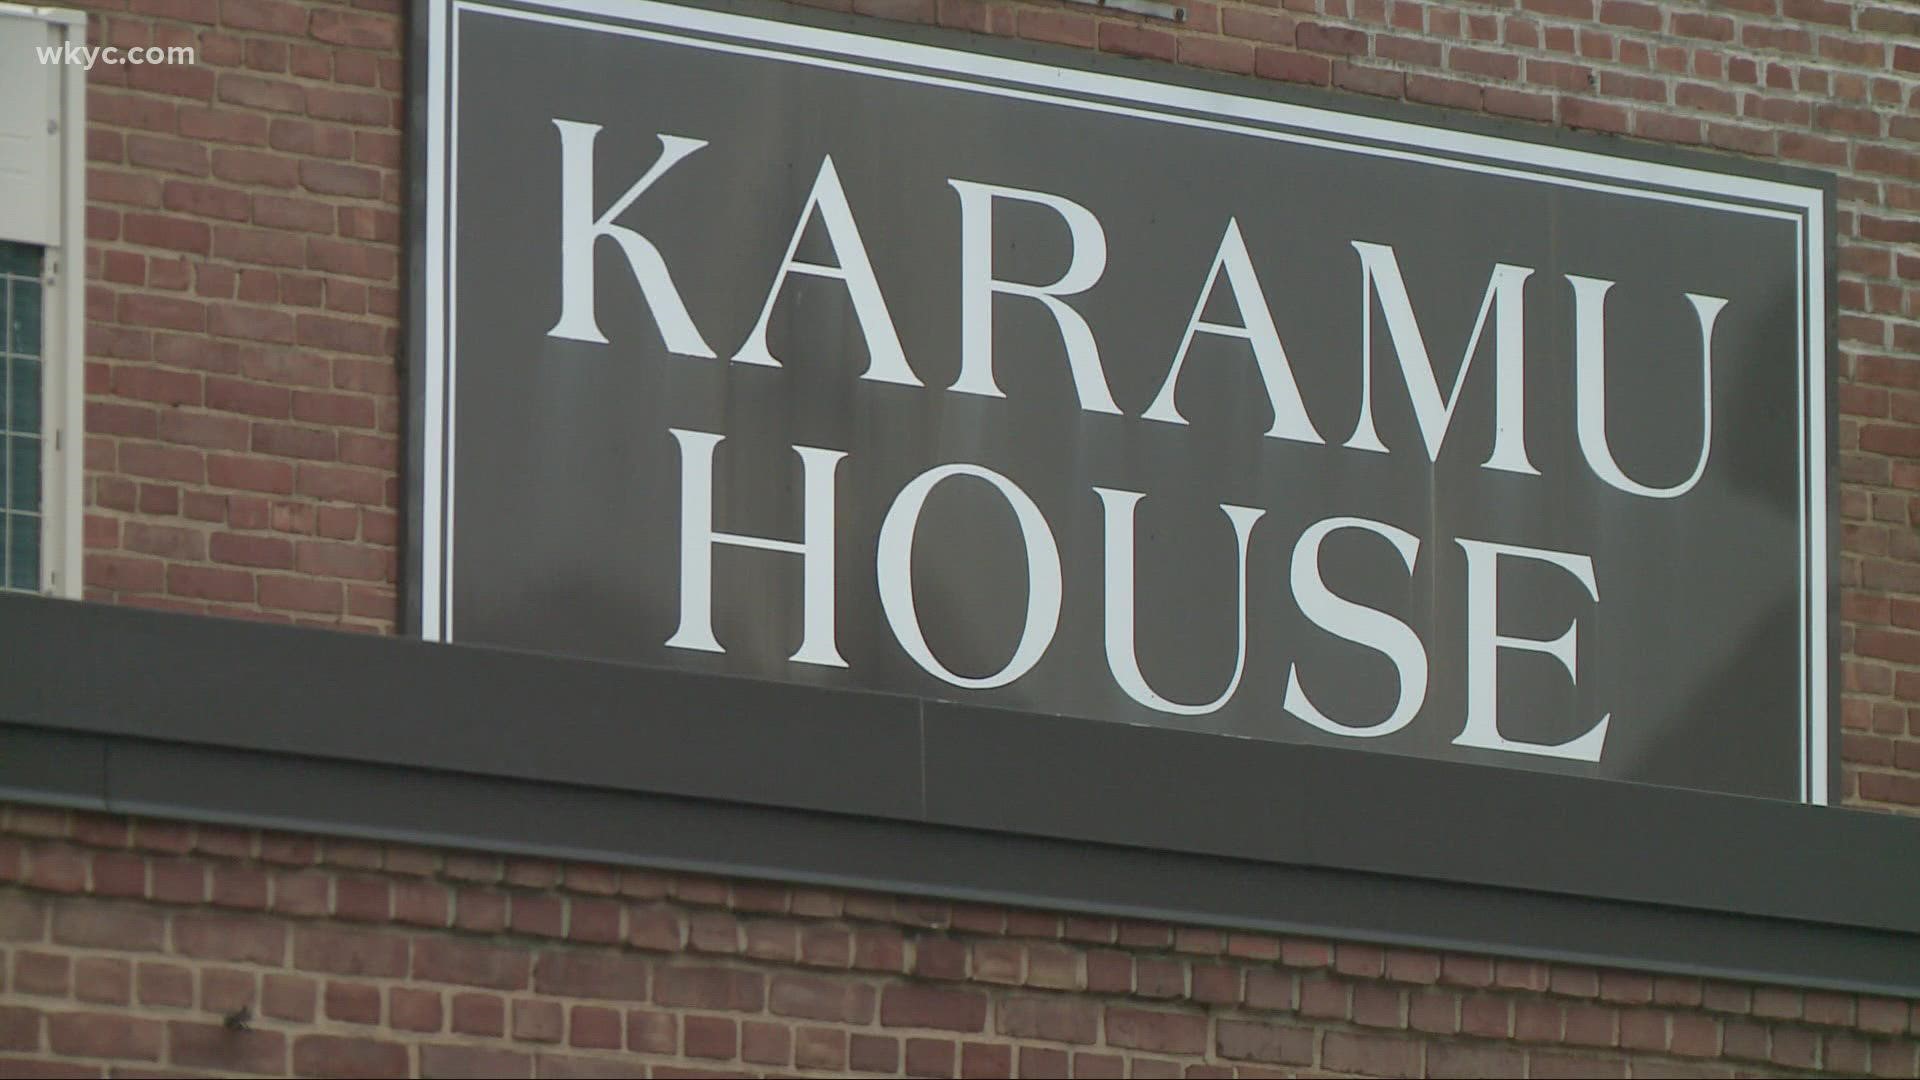 It's back! The Karamu House, America's oldest African American theater, is finally hosting in-person shows again.